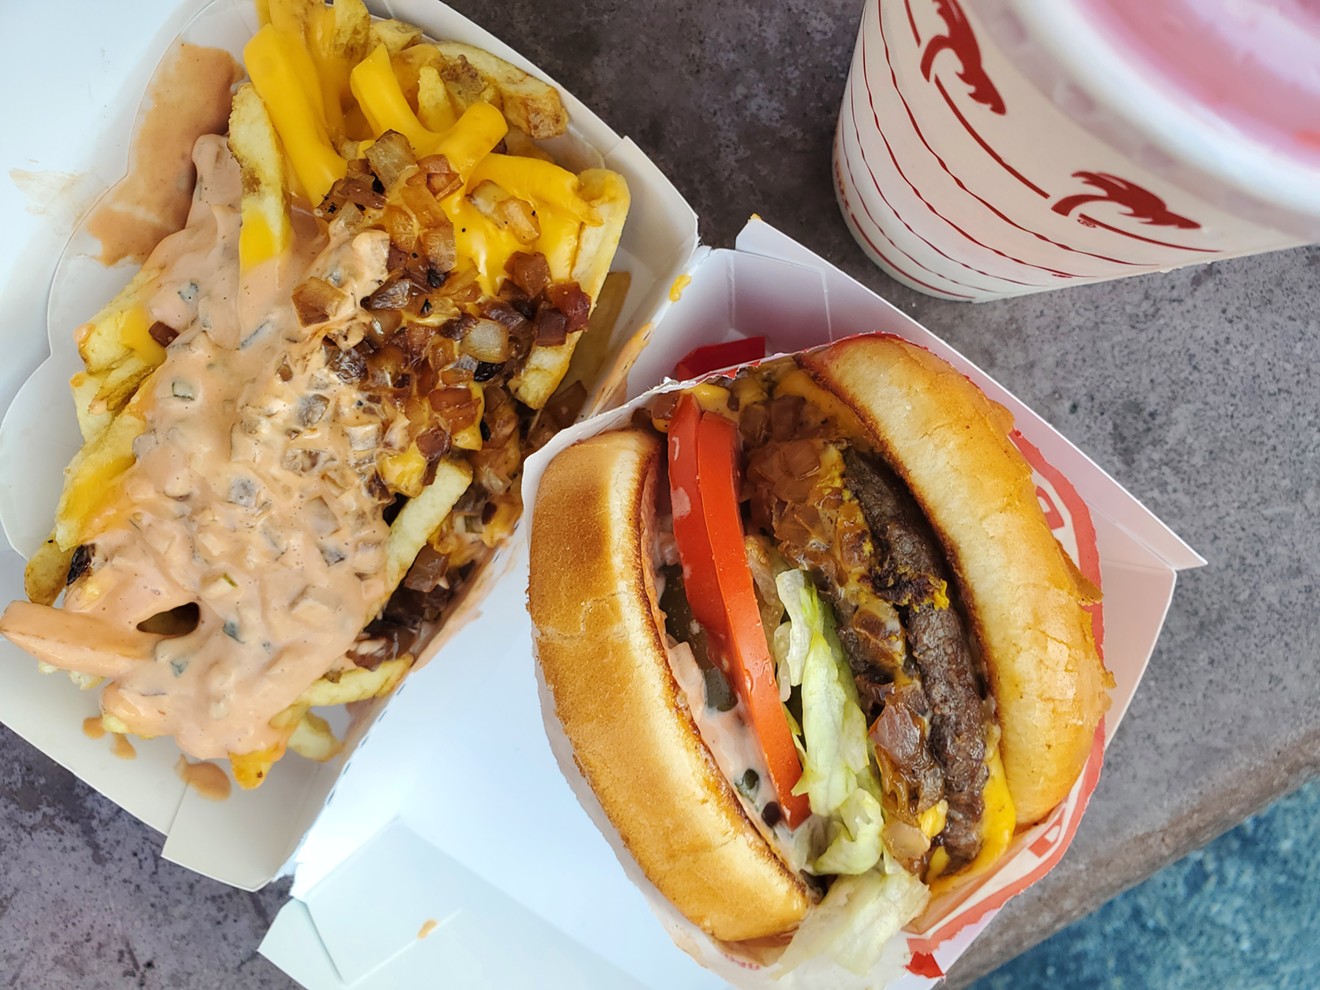 In-N-Out's first location within Denver city limits will debut on April 28.